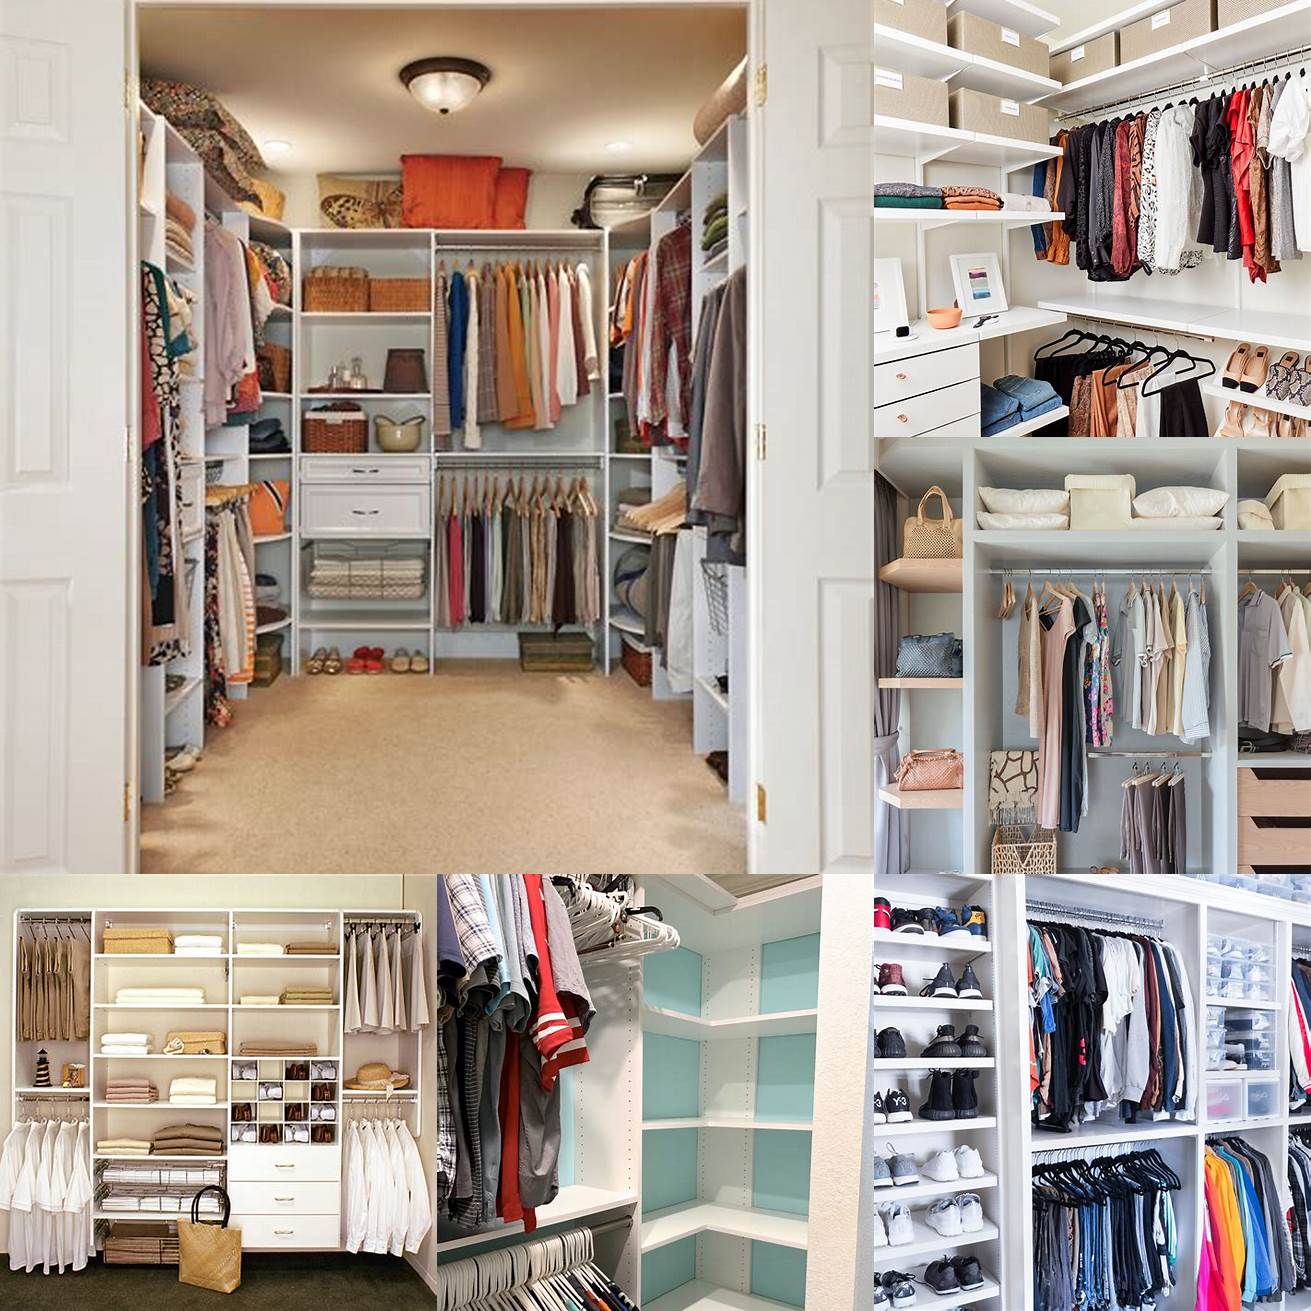 2 Better organization Closet furniture can help you keep your clothes and personal items in order making it easier to find what you need when you need it